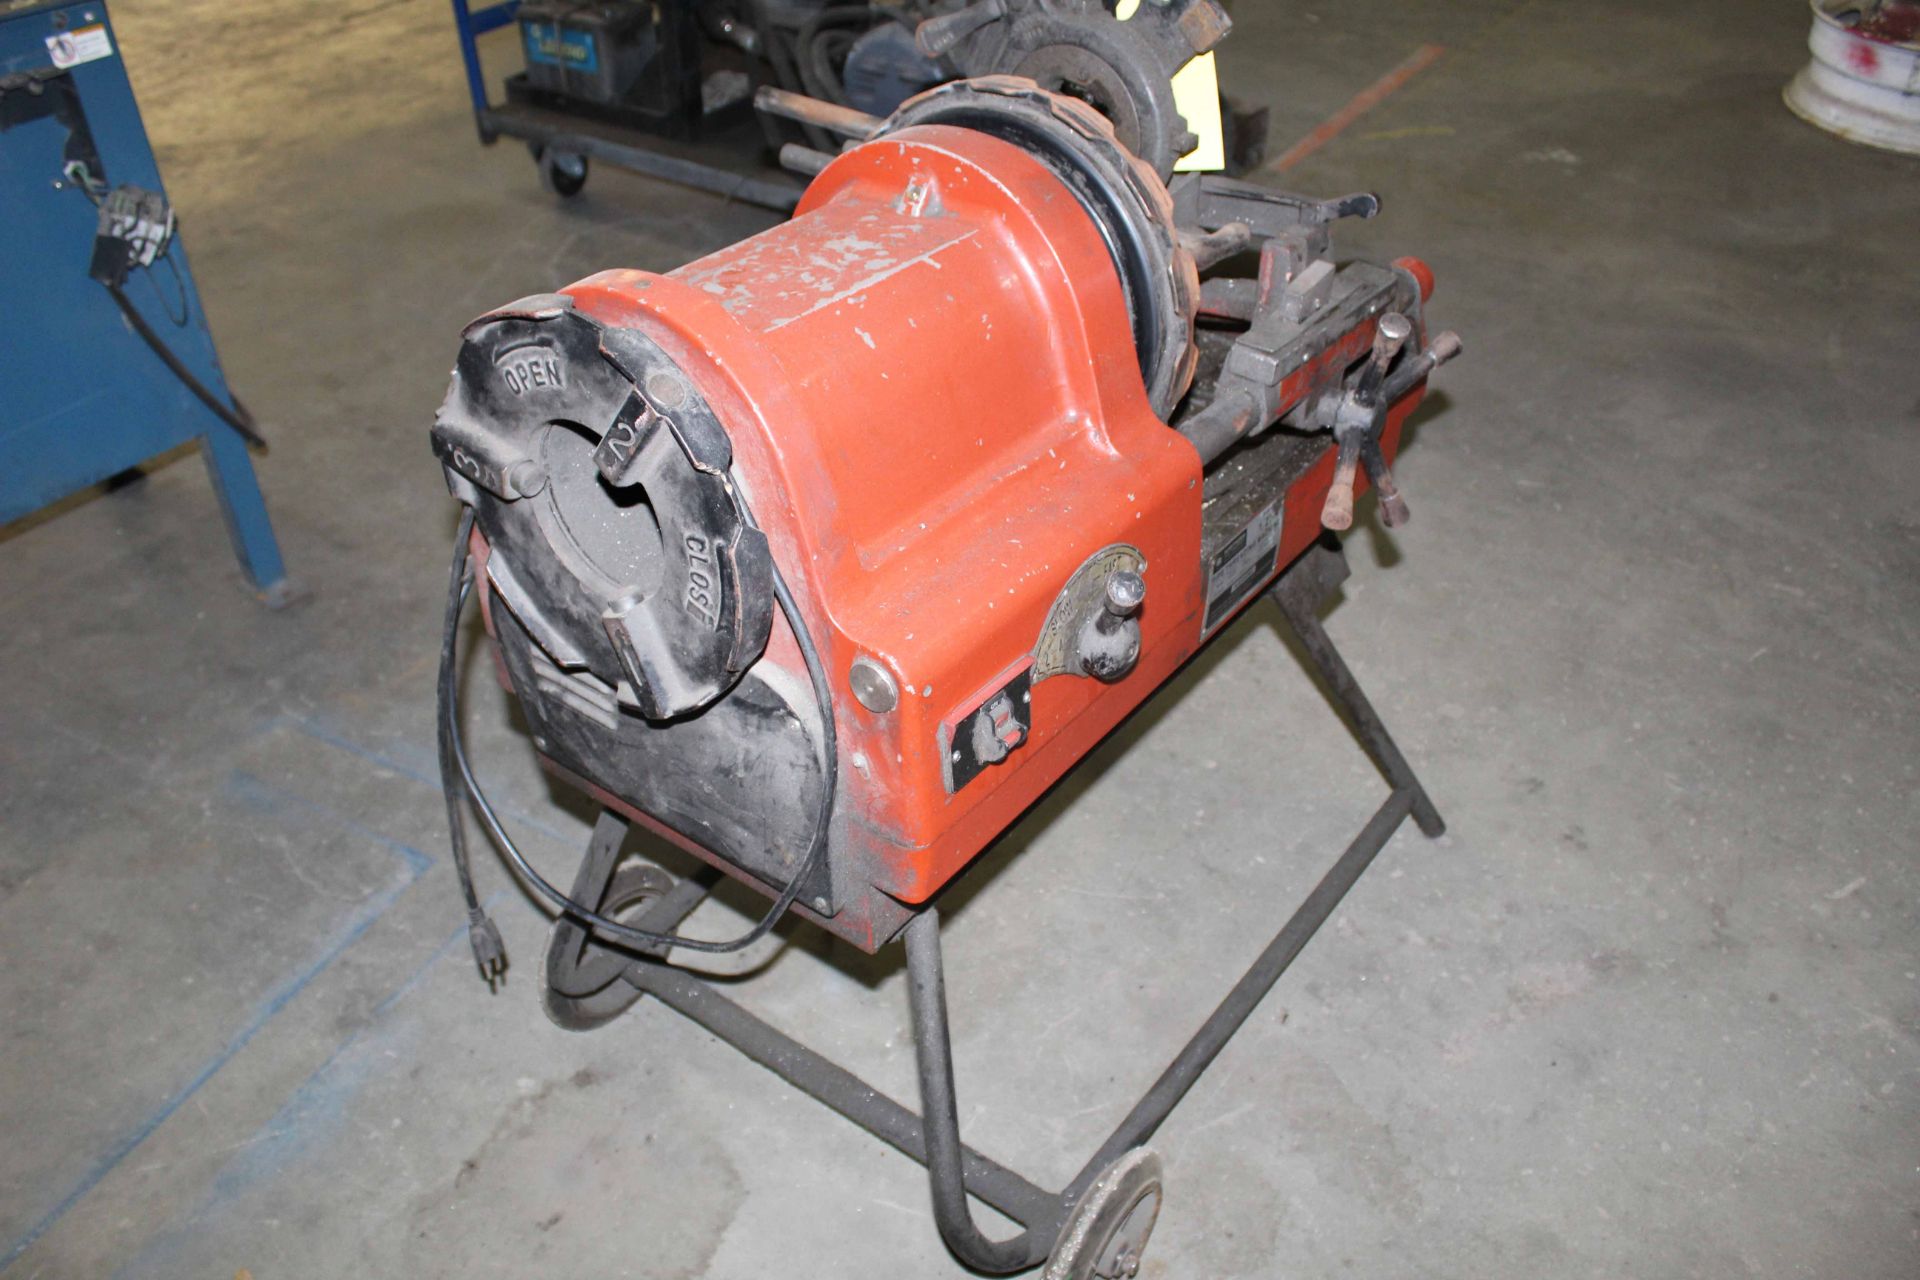 PIPE THREADING MACHINE, NORTHERN, new 2010, 1-1/2" to 4", S/N 020 - Image 4 of 4